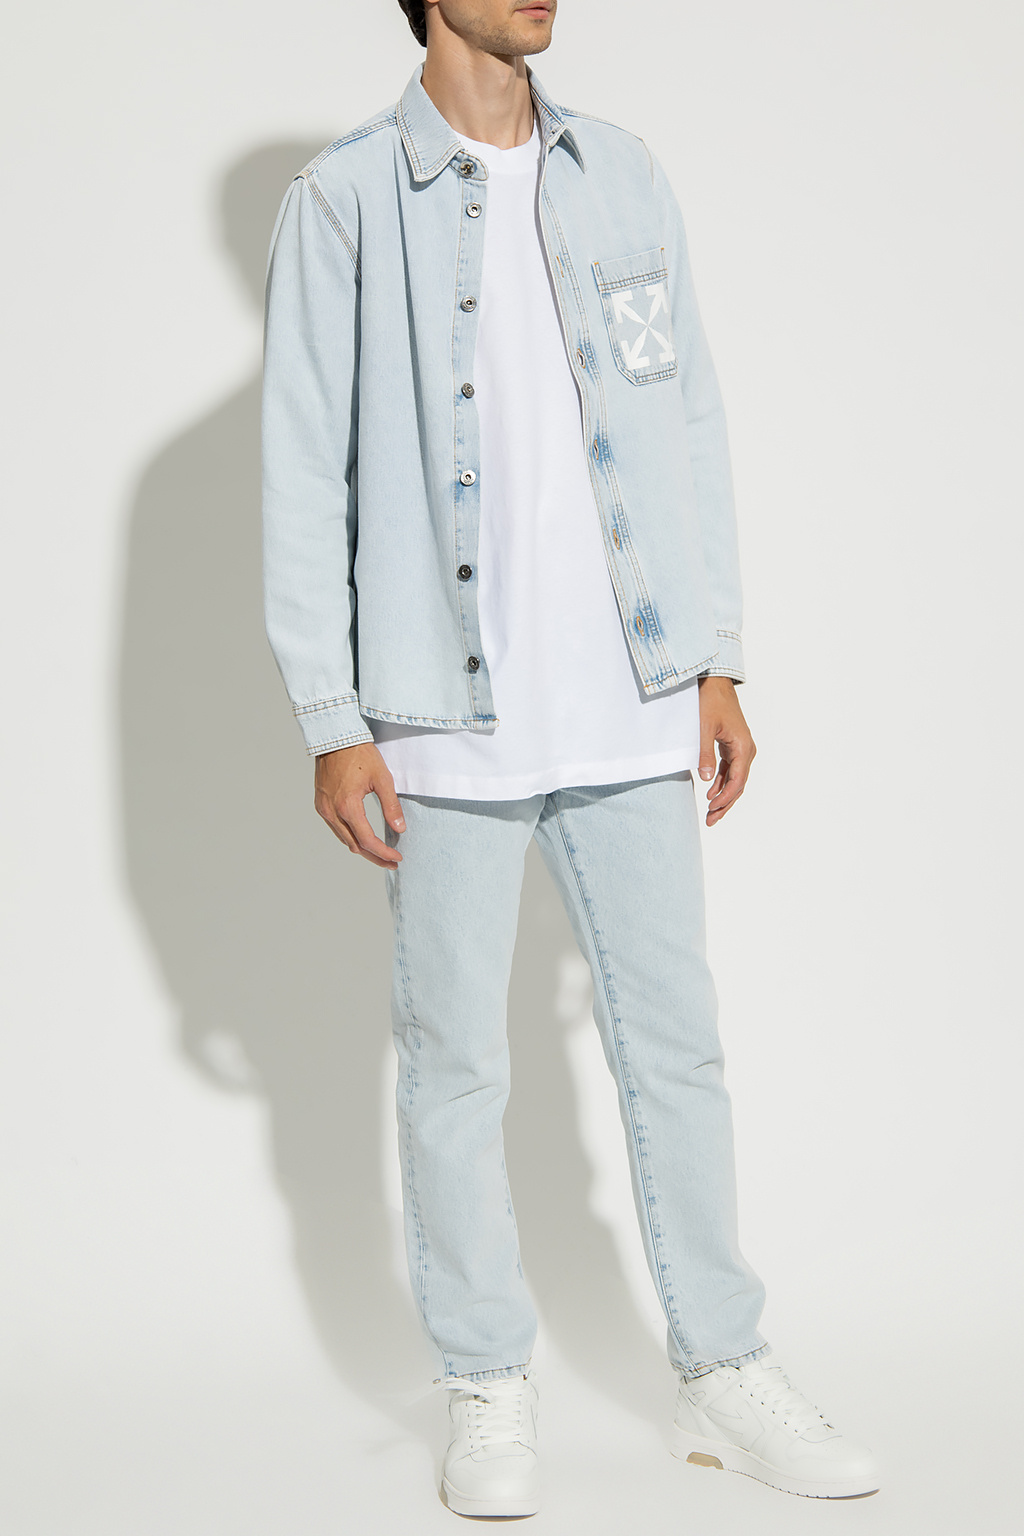 Off-White thick and dense jacket